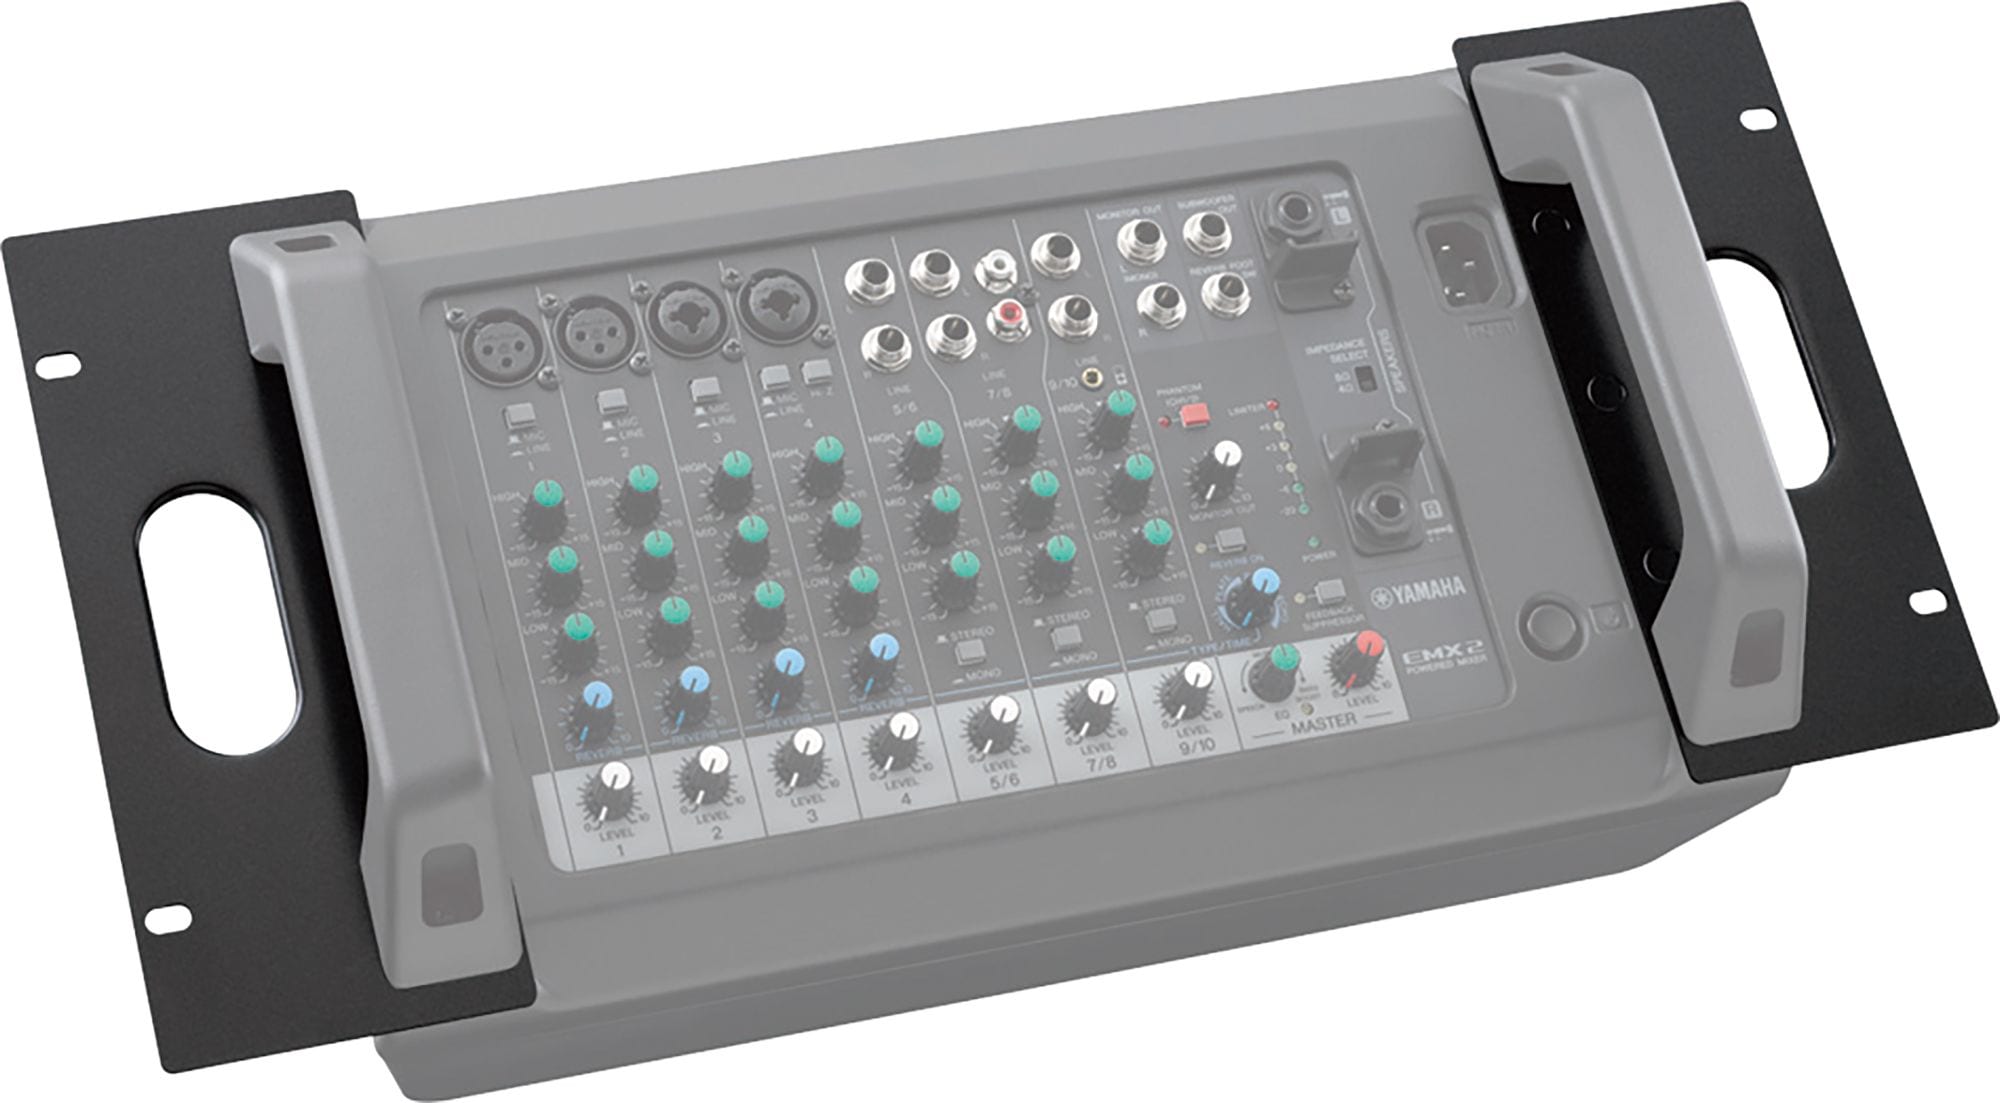 EMX2 - Overview - Mixers - Professional Audio - Products - Yamaha USA